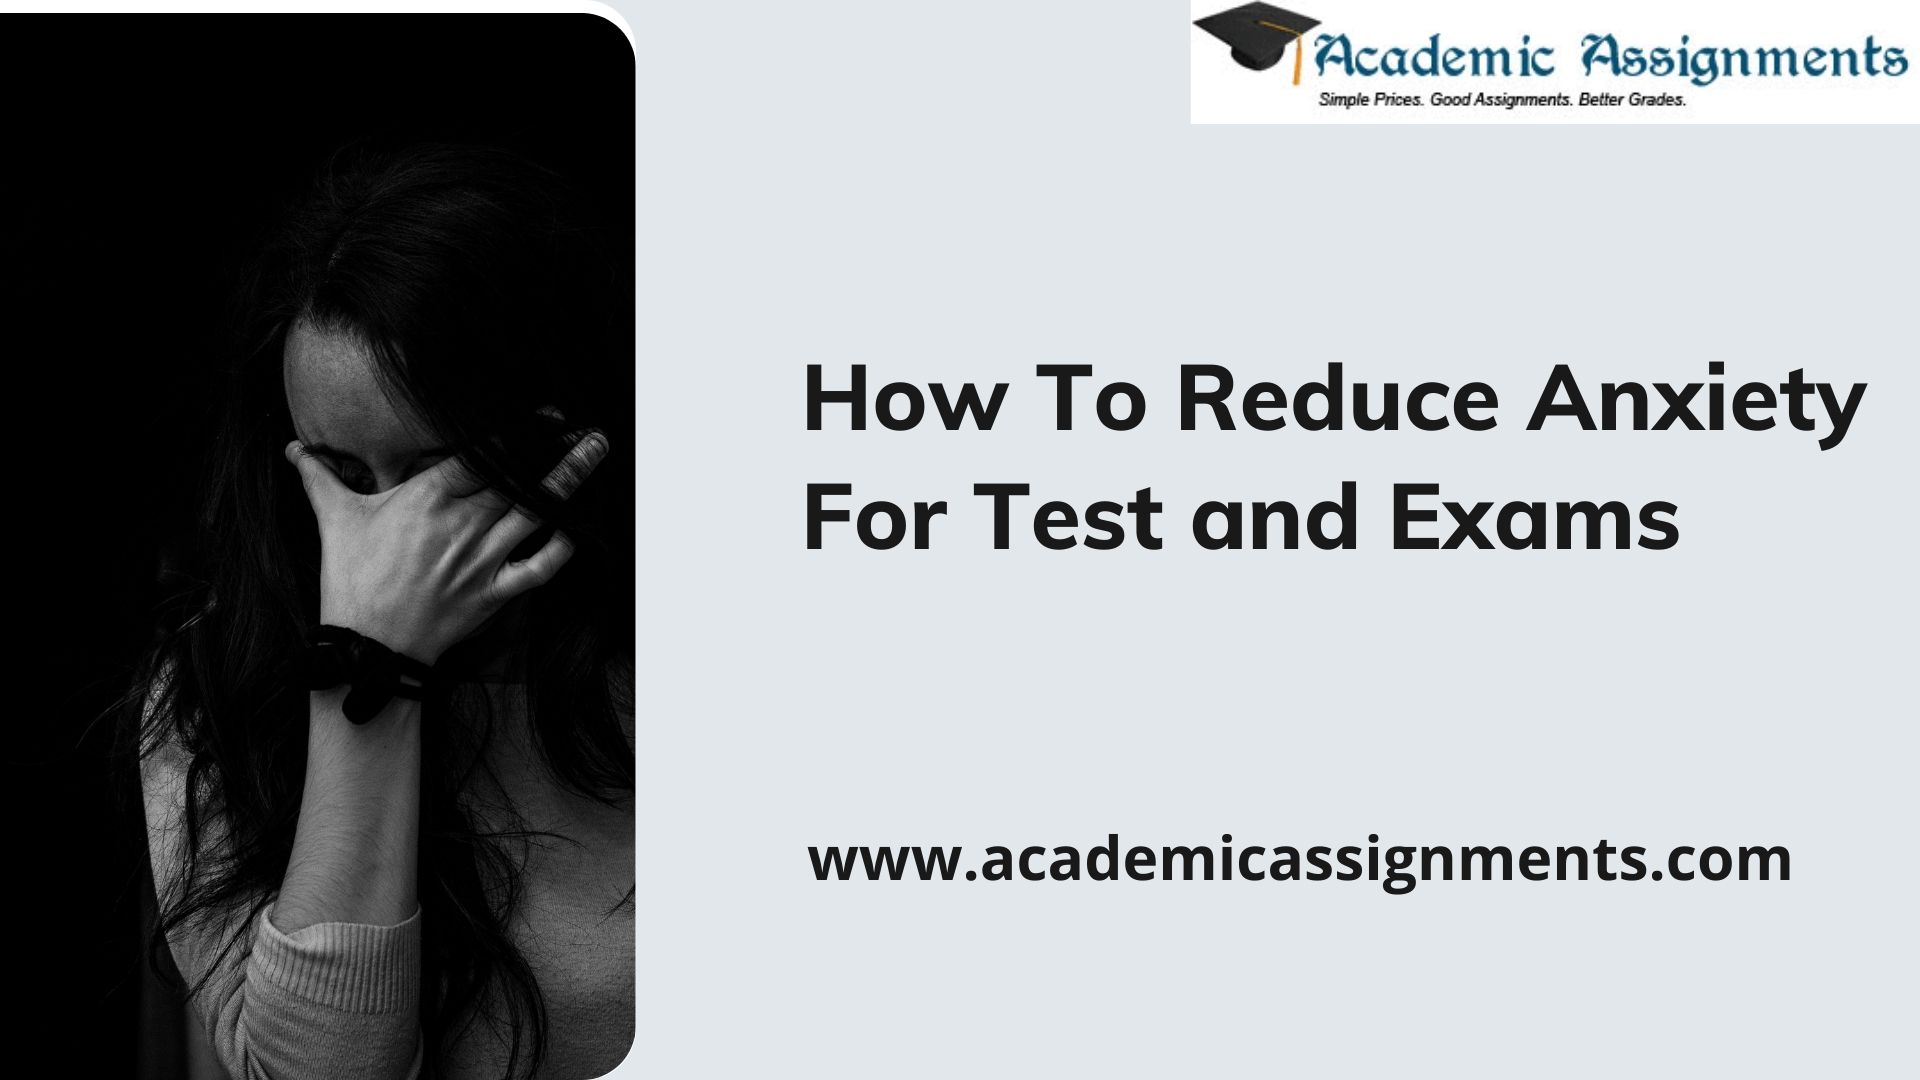 How To Reduce Anxiety For Test and Exams